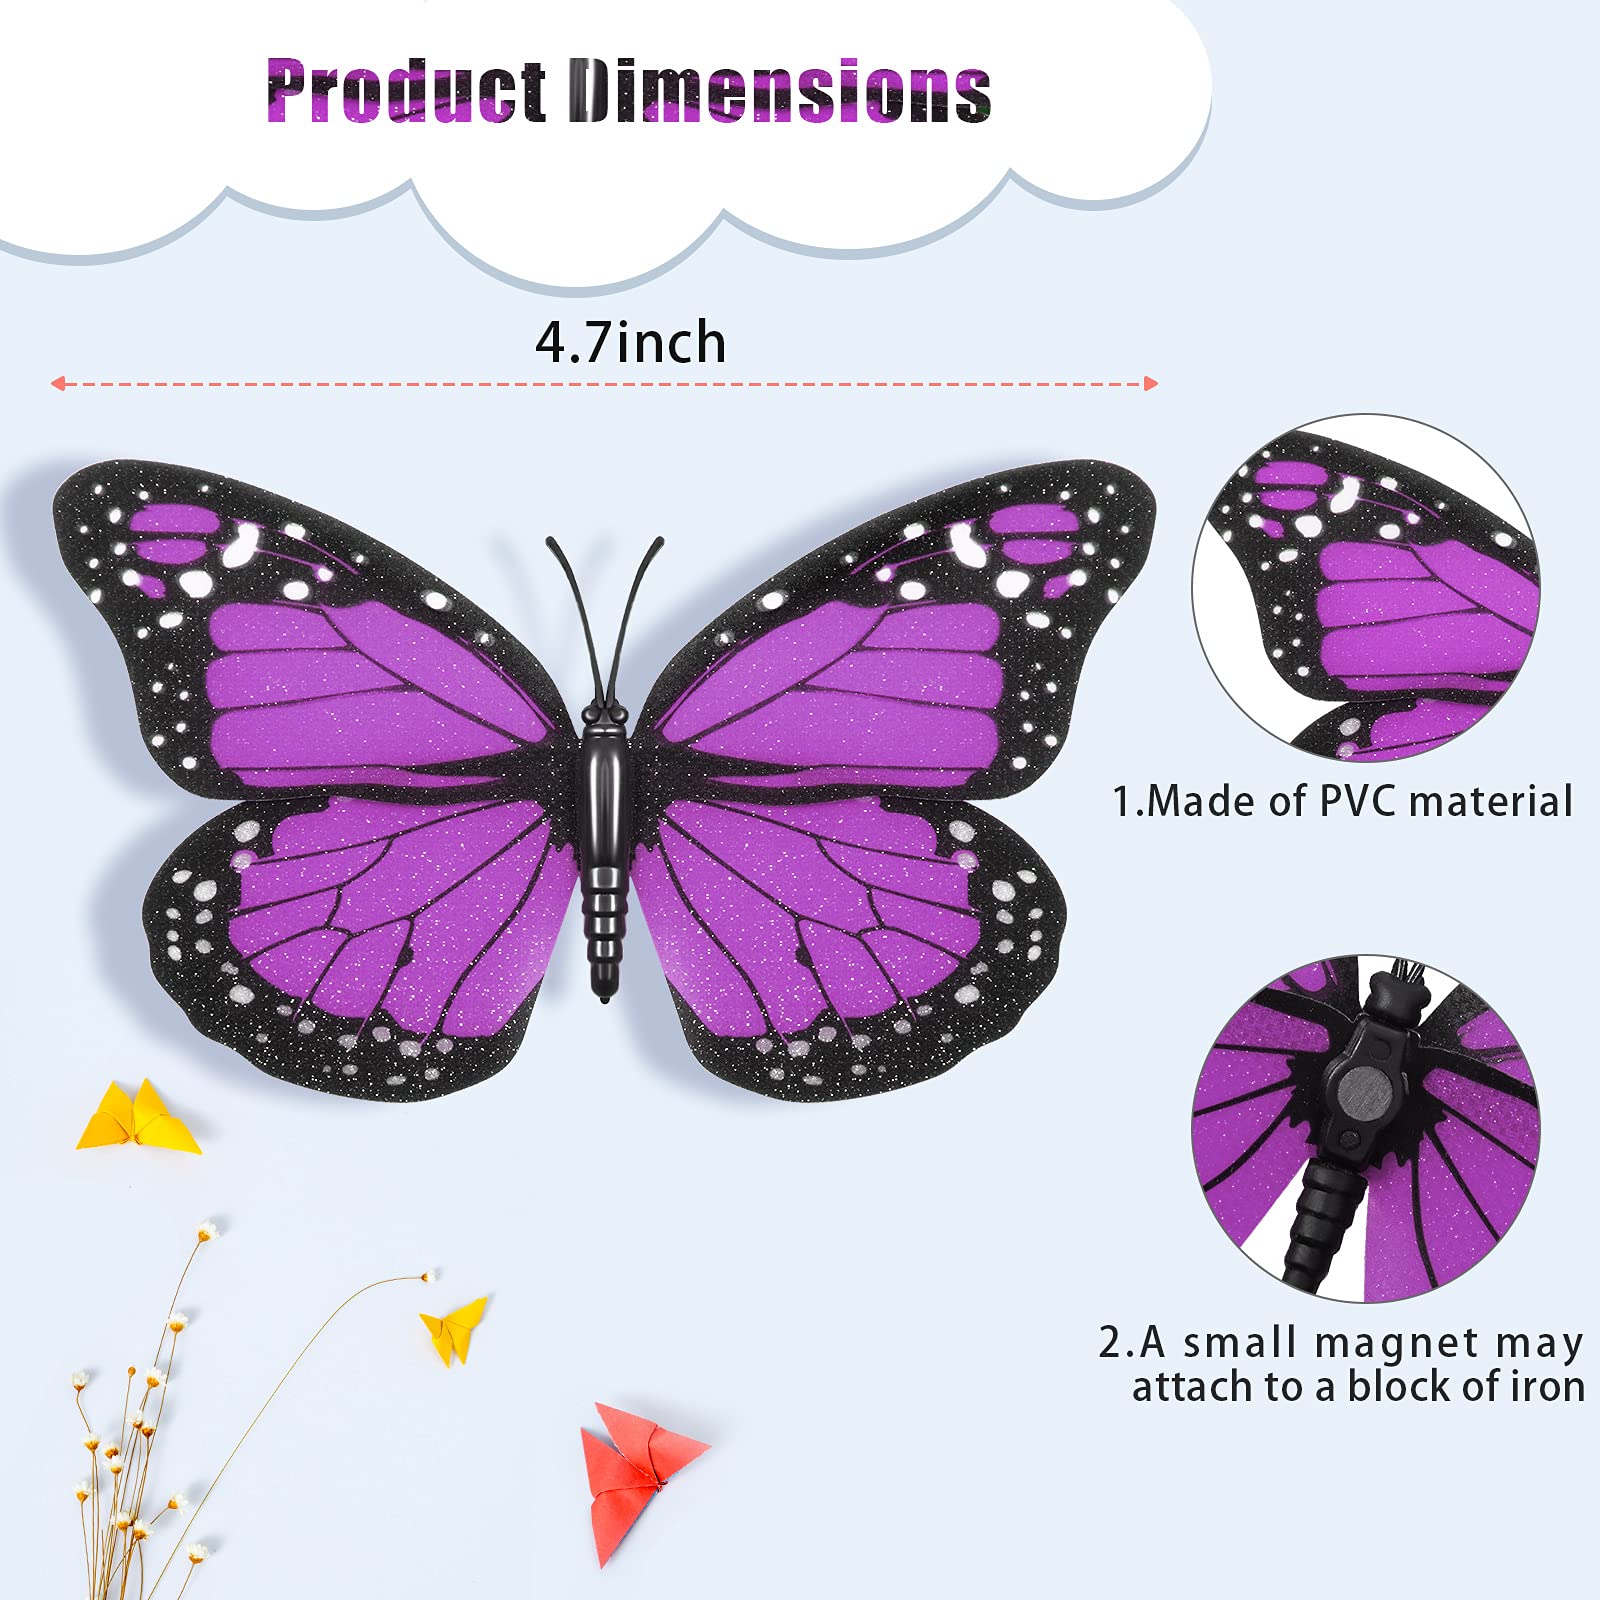 Monarch Butterfly Decorations Halloween Butterfly Wall Decor 4.7 inch Orange Artificial Fake Butterflies for Crafts 3D Magnet for Home Wall Wedding Bedroom (Purple, 24 Pieces)